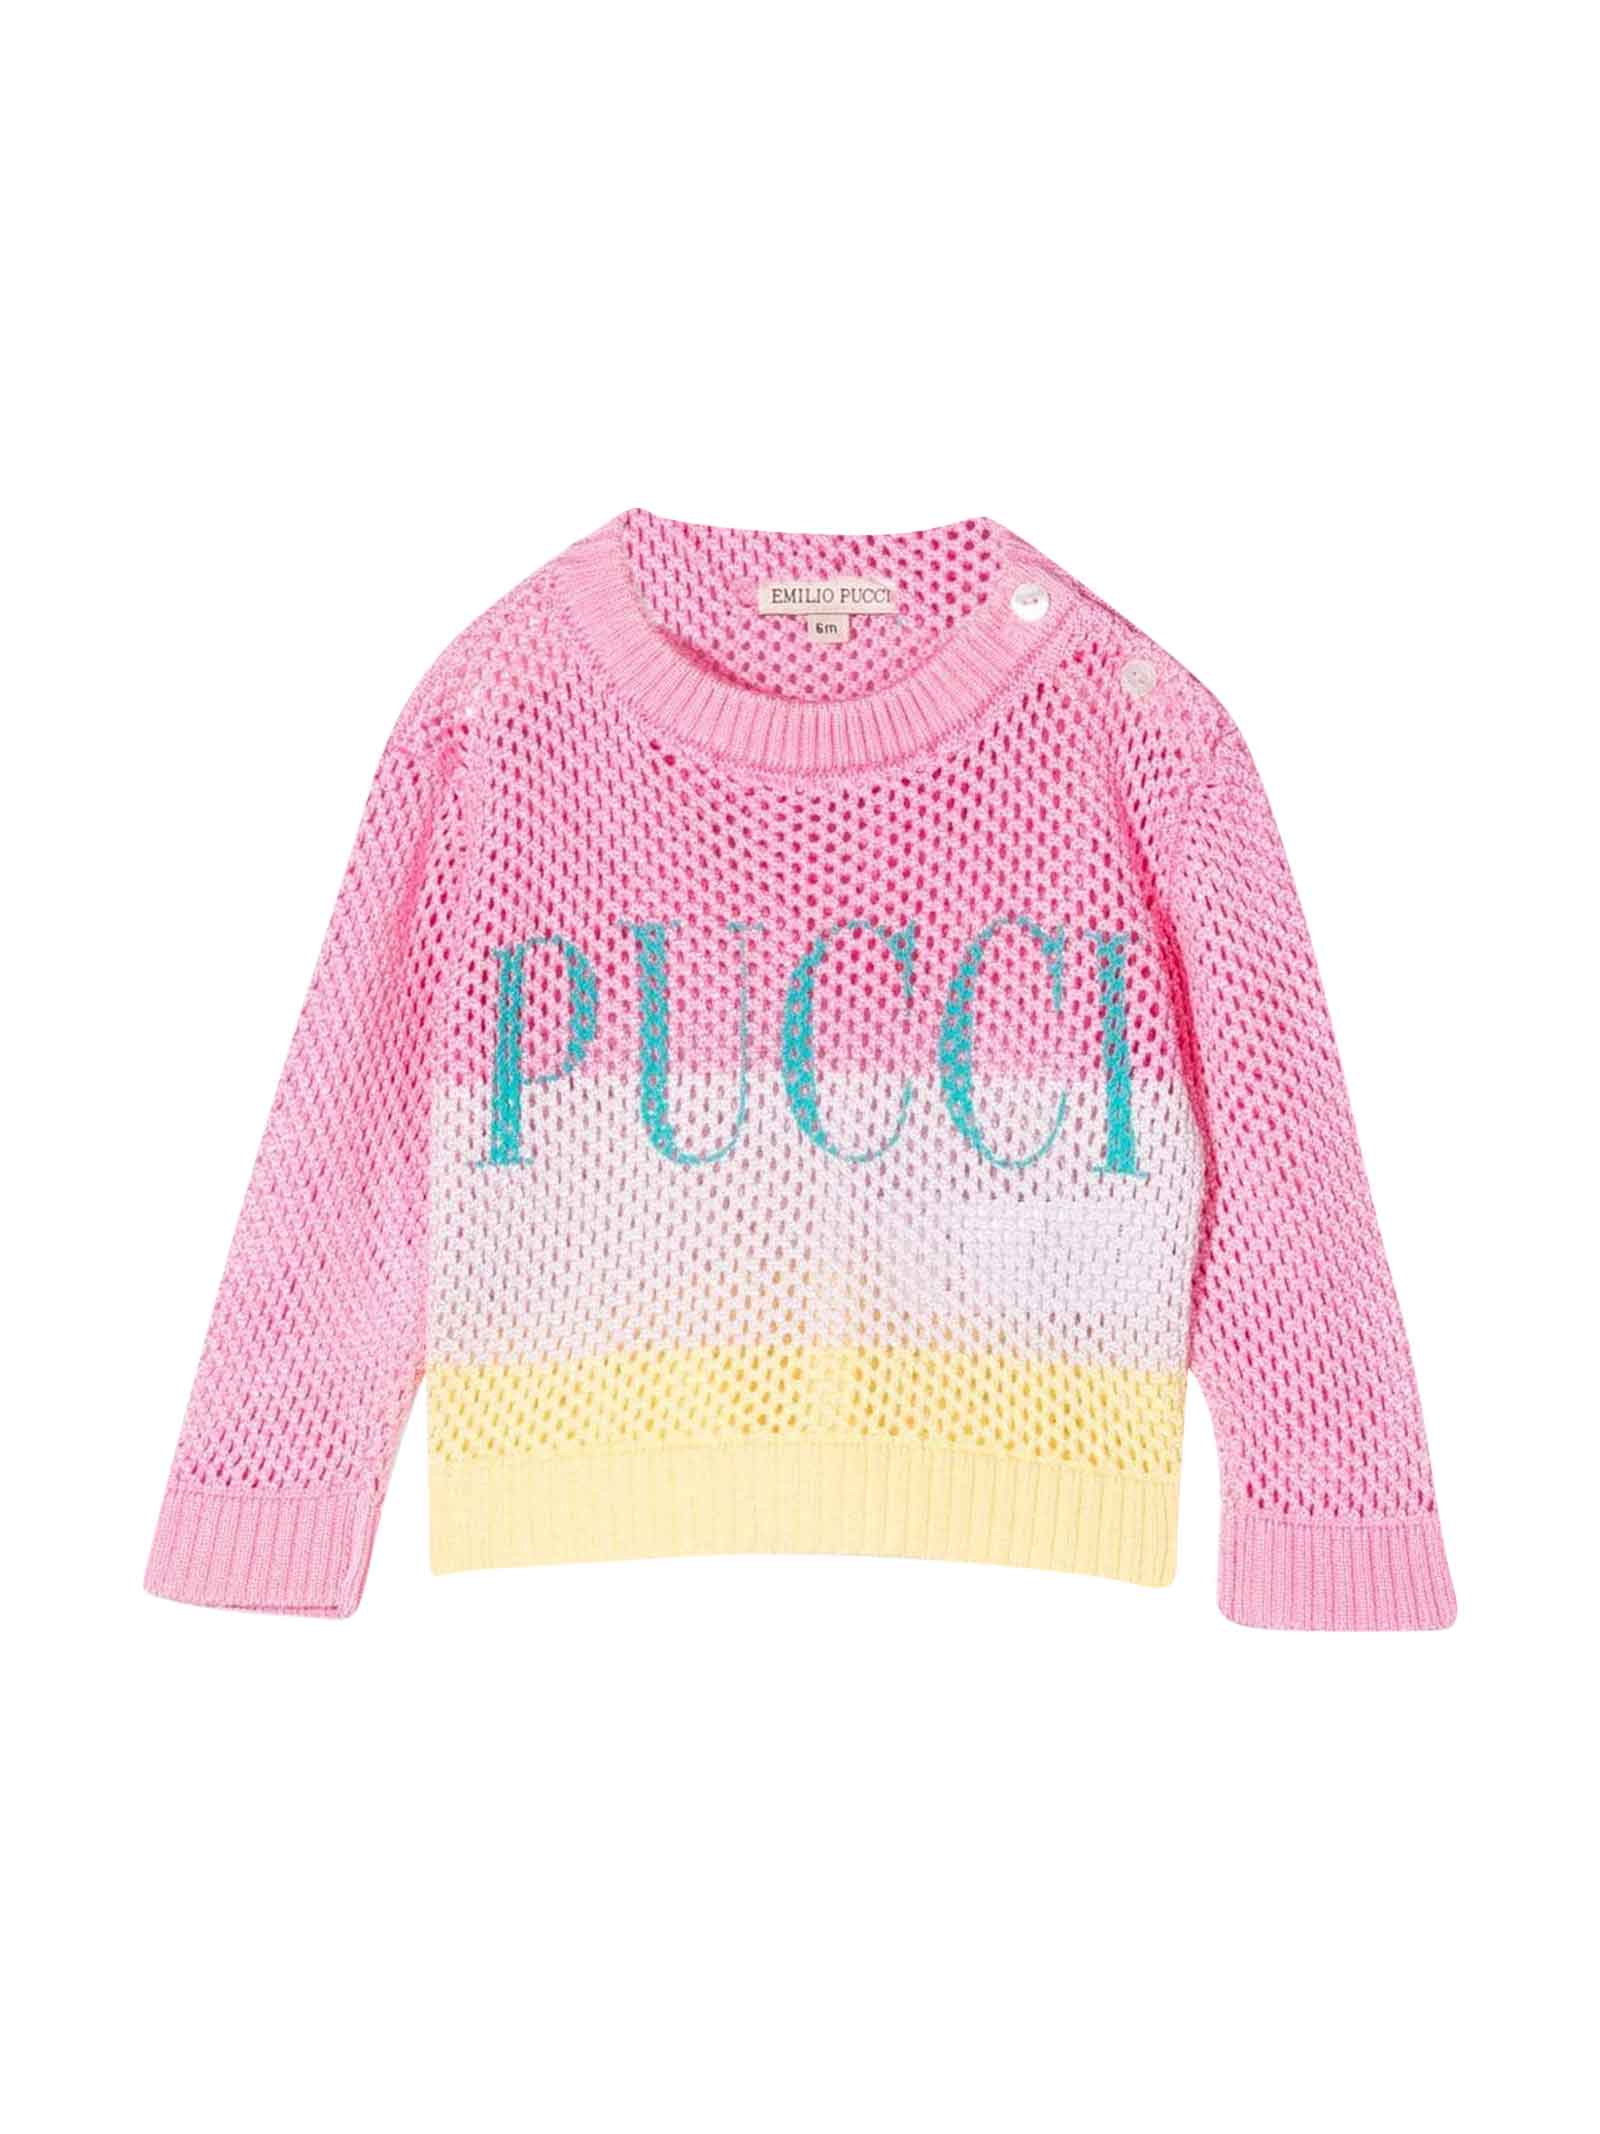 Emilio Pucci Baby Girl Pink Shirt With Multicolor Print